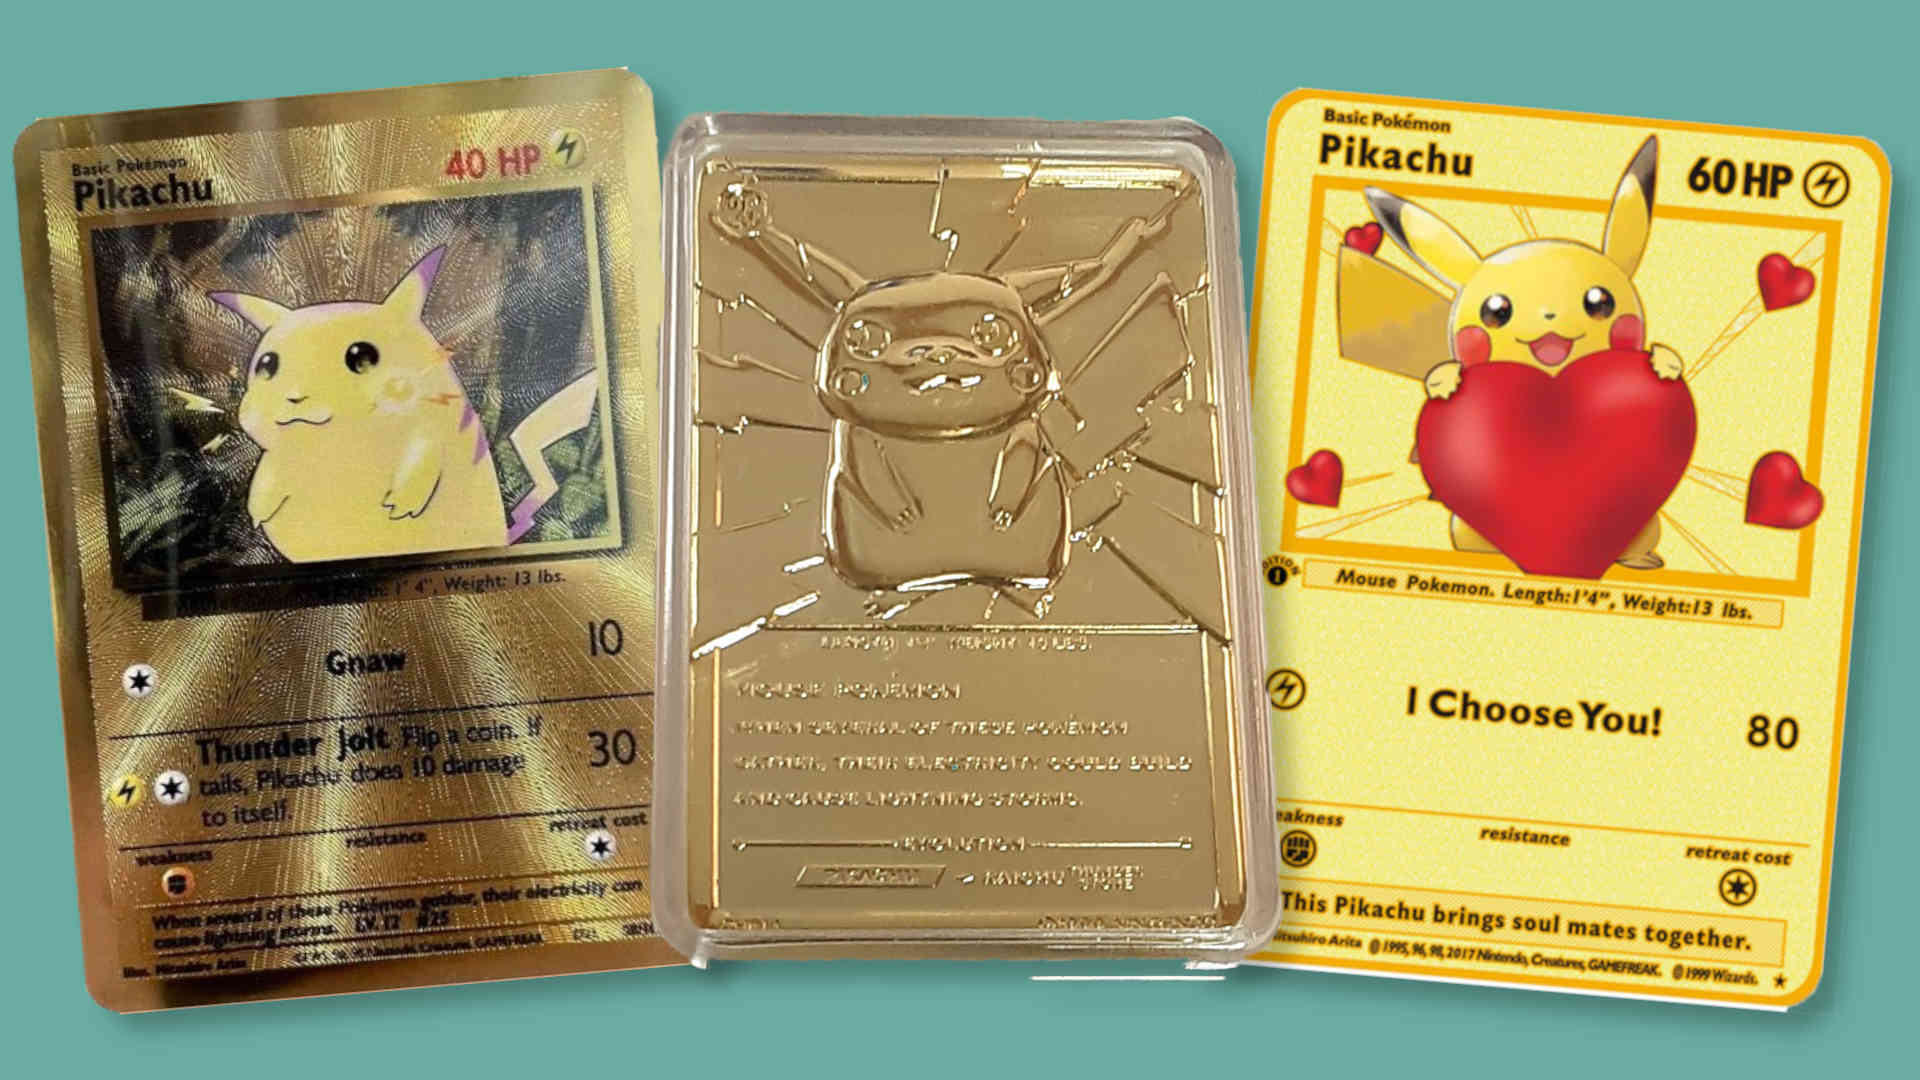 Are Gold Pokemon Cards Real? - Card Gamer